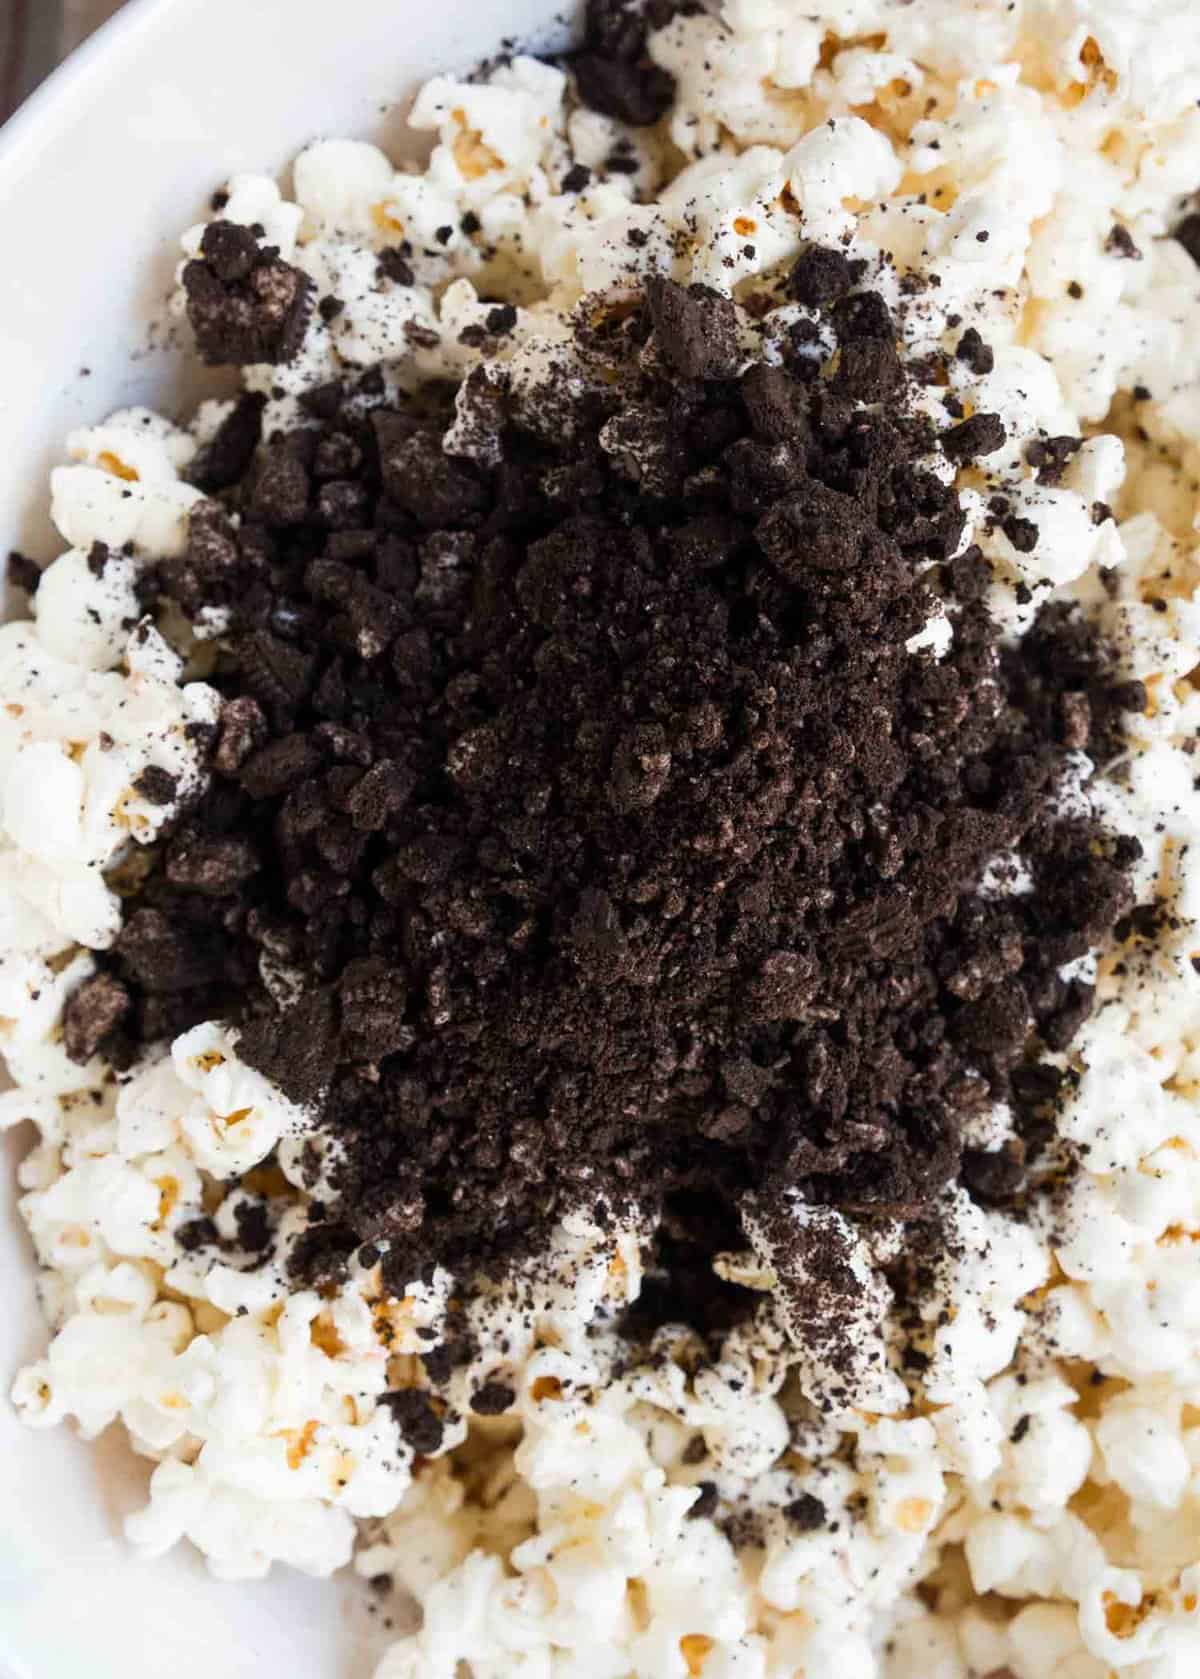 Crushed Oreos on top of white chocolate popcorn.